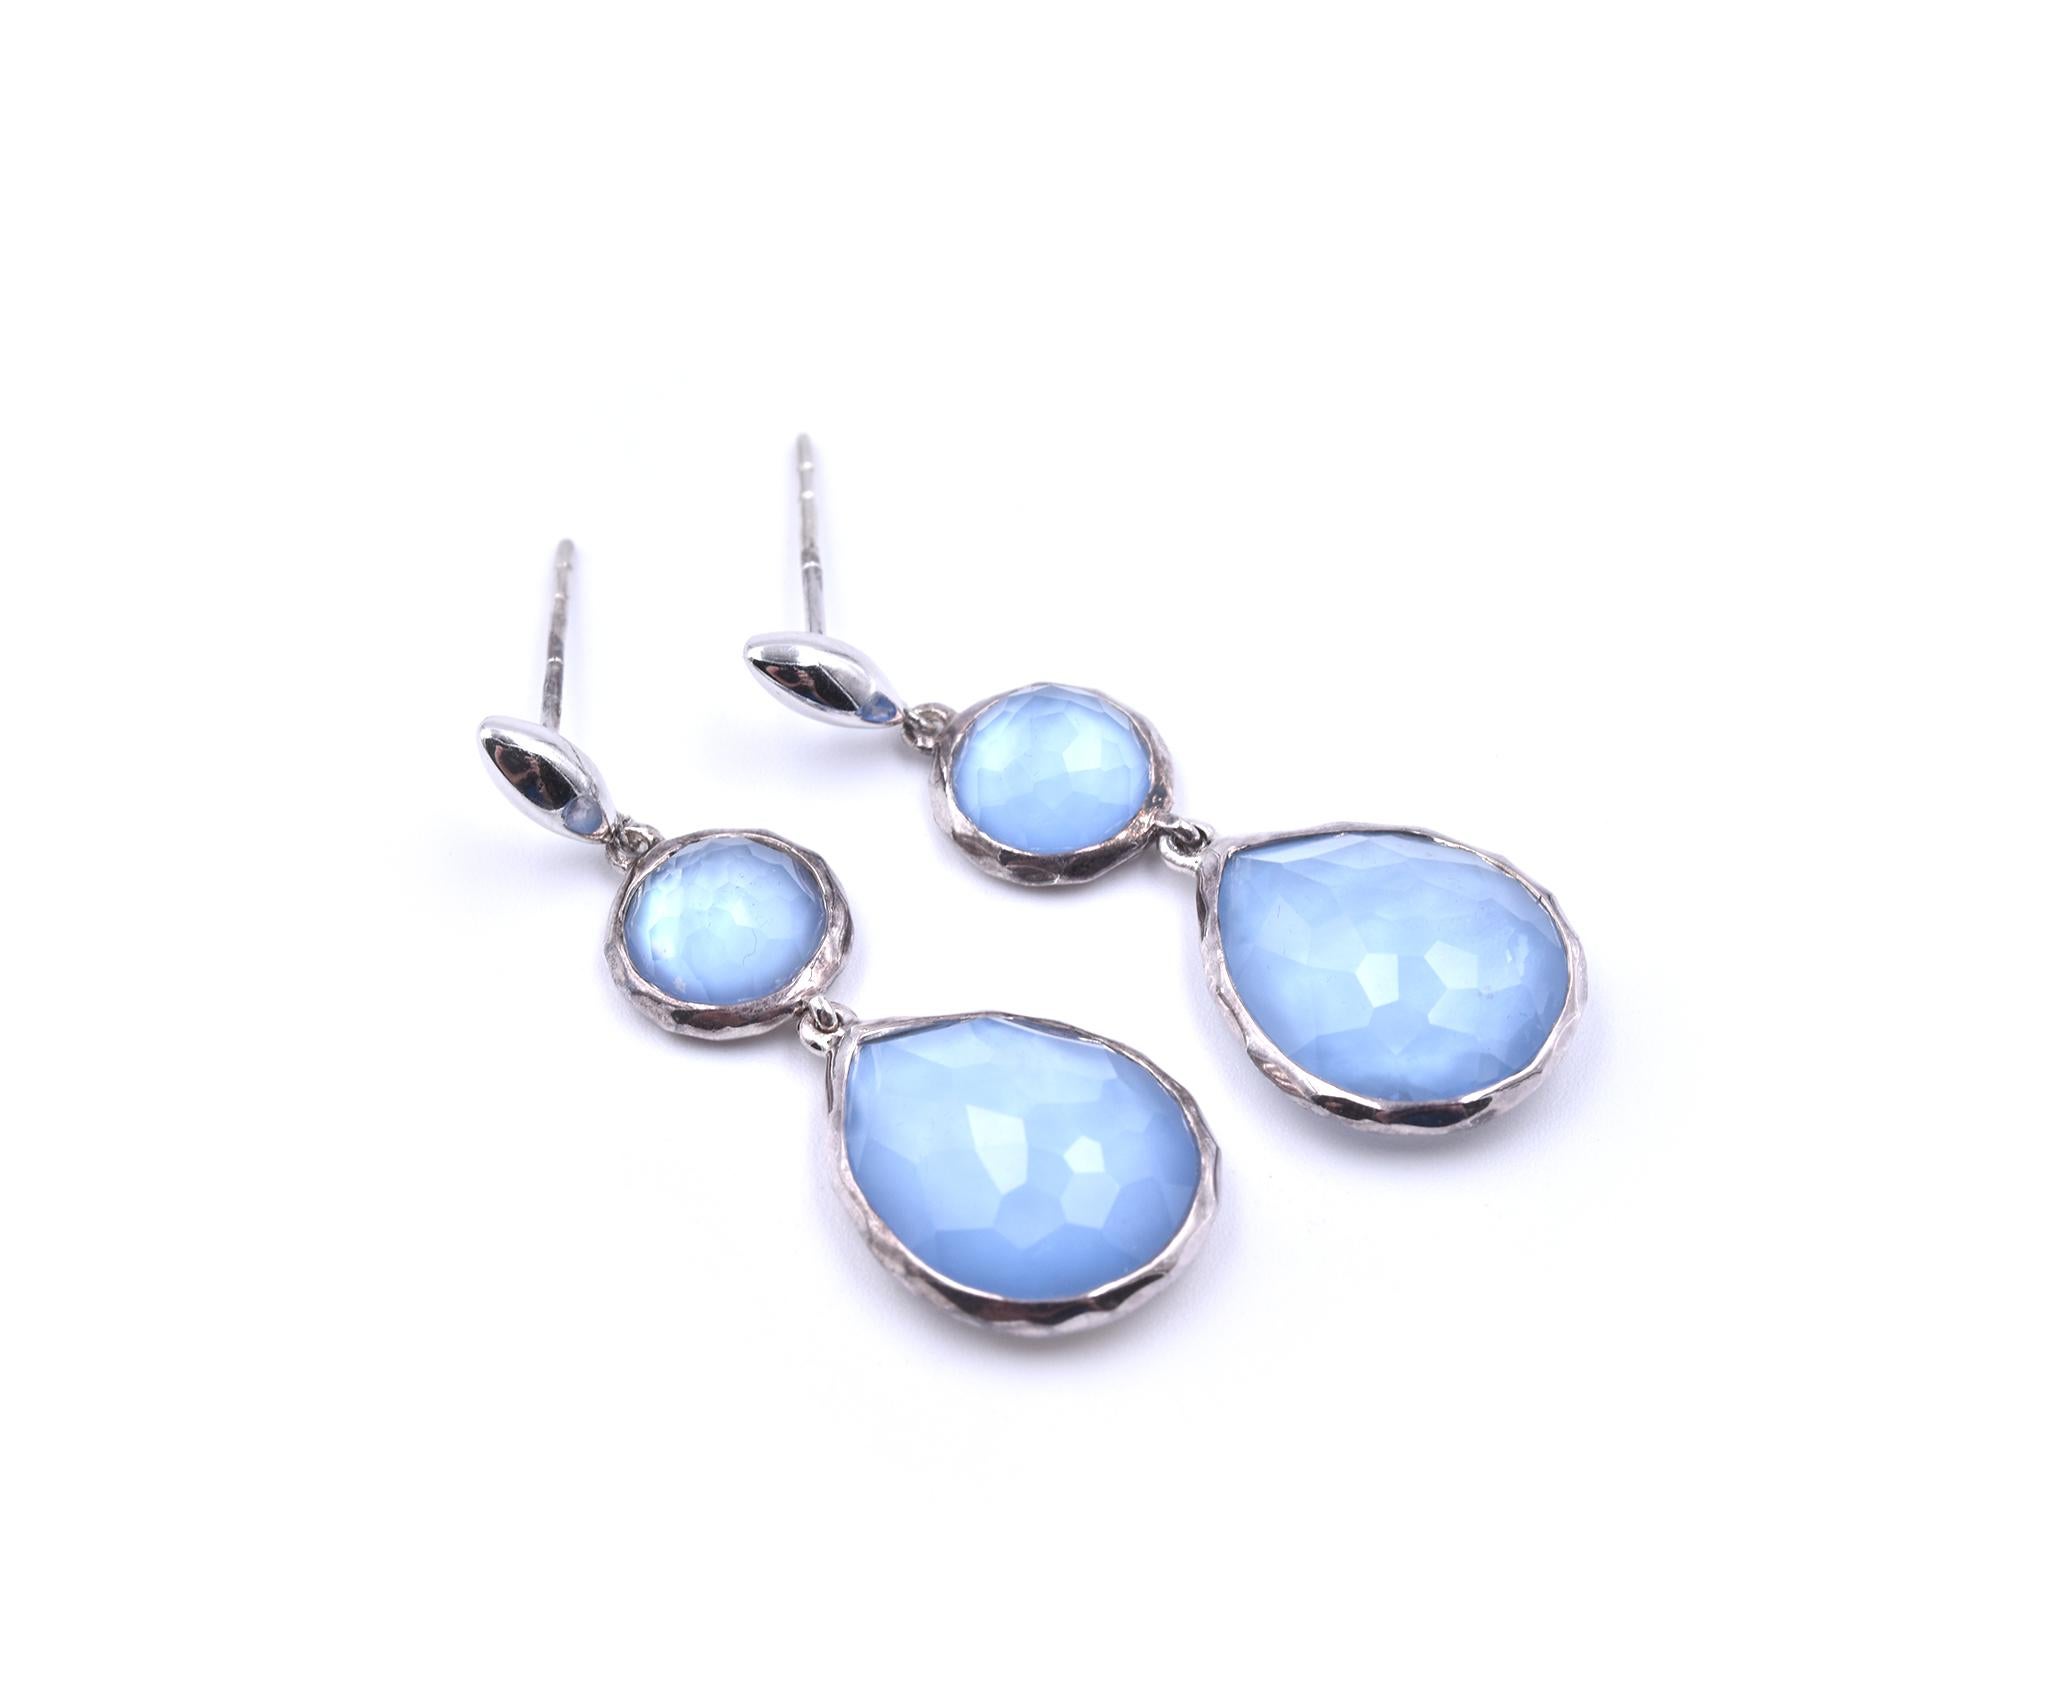 Designer: Ippolita
Stones: mother-of-pearl with quartz
Dimensions: earring measures 42mm in length and 14.75mm wide
Weight: 7.38 grams
